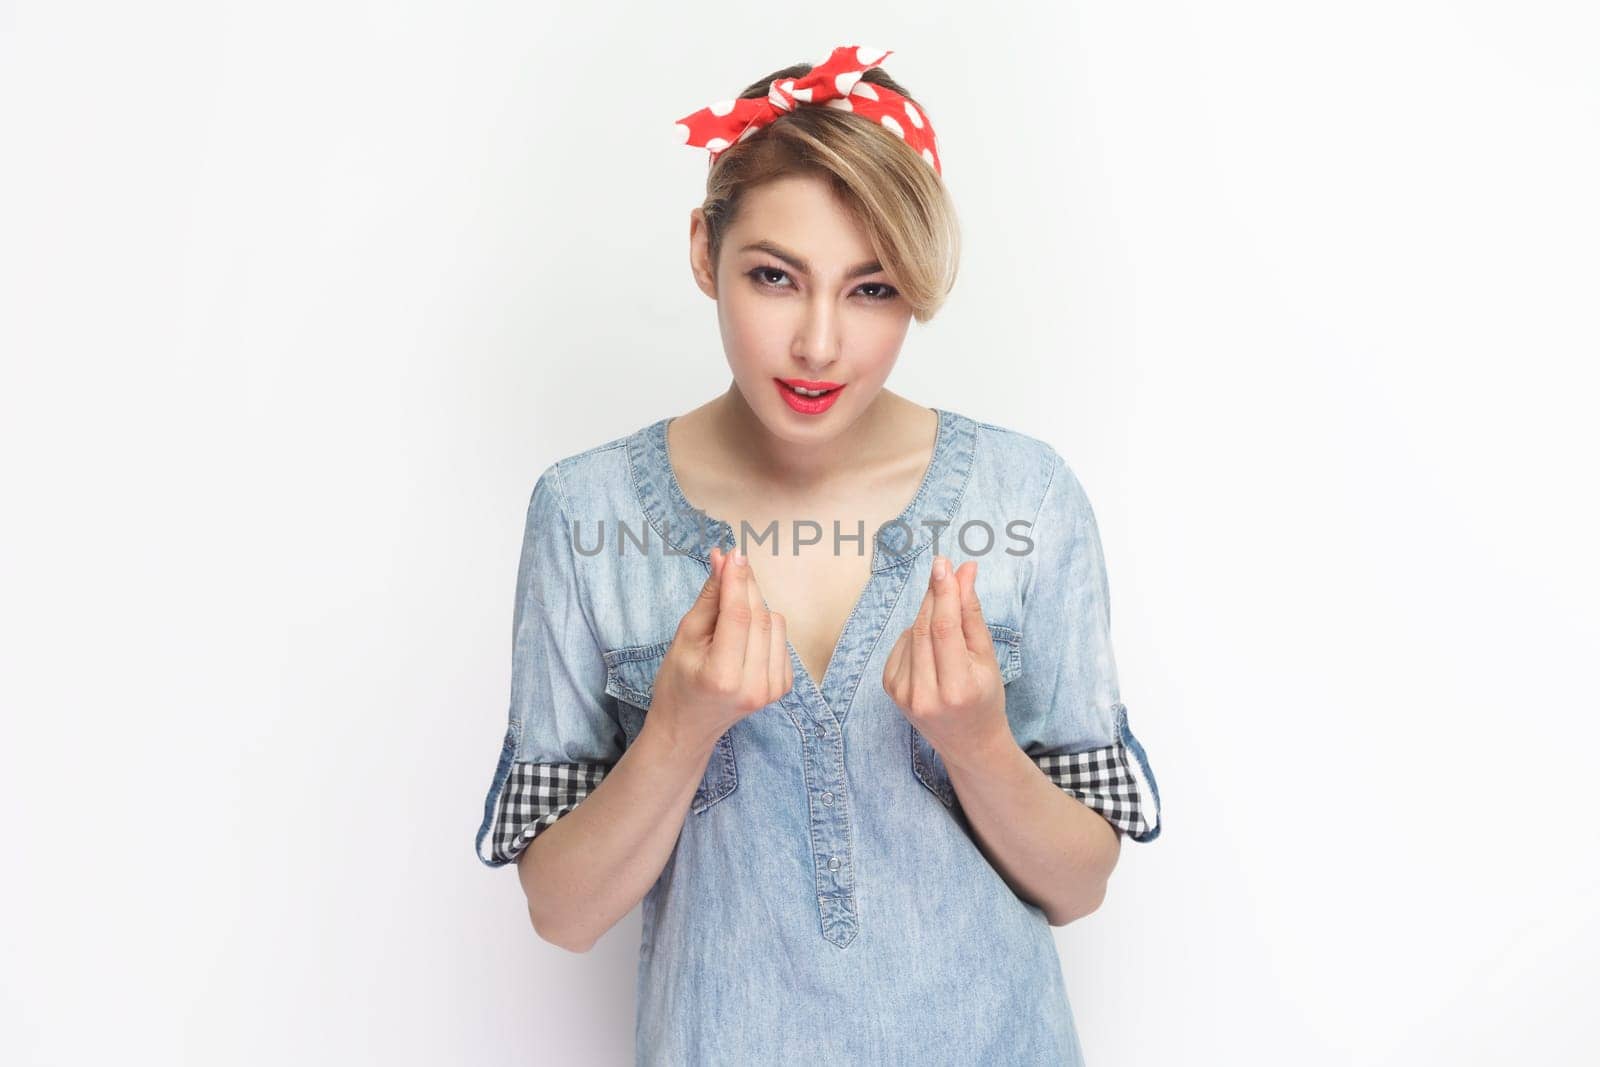 Portrait of attractive beautiful blonde woman wearing blue denim shirt and red headband standing showing money gesture with fingers. Indoor studio shot isolated on gray background.